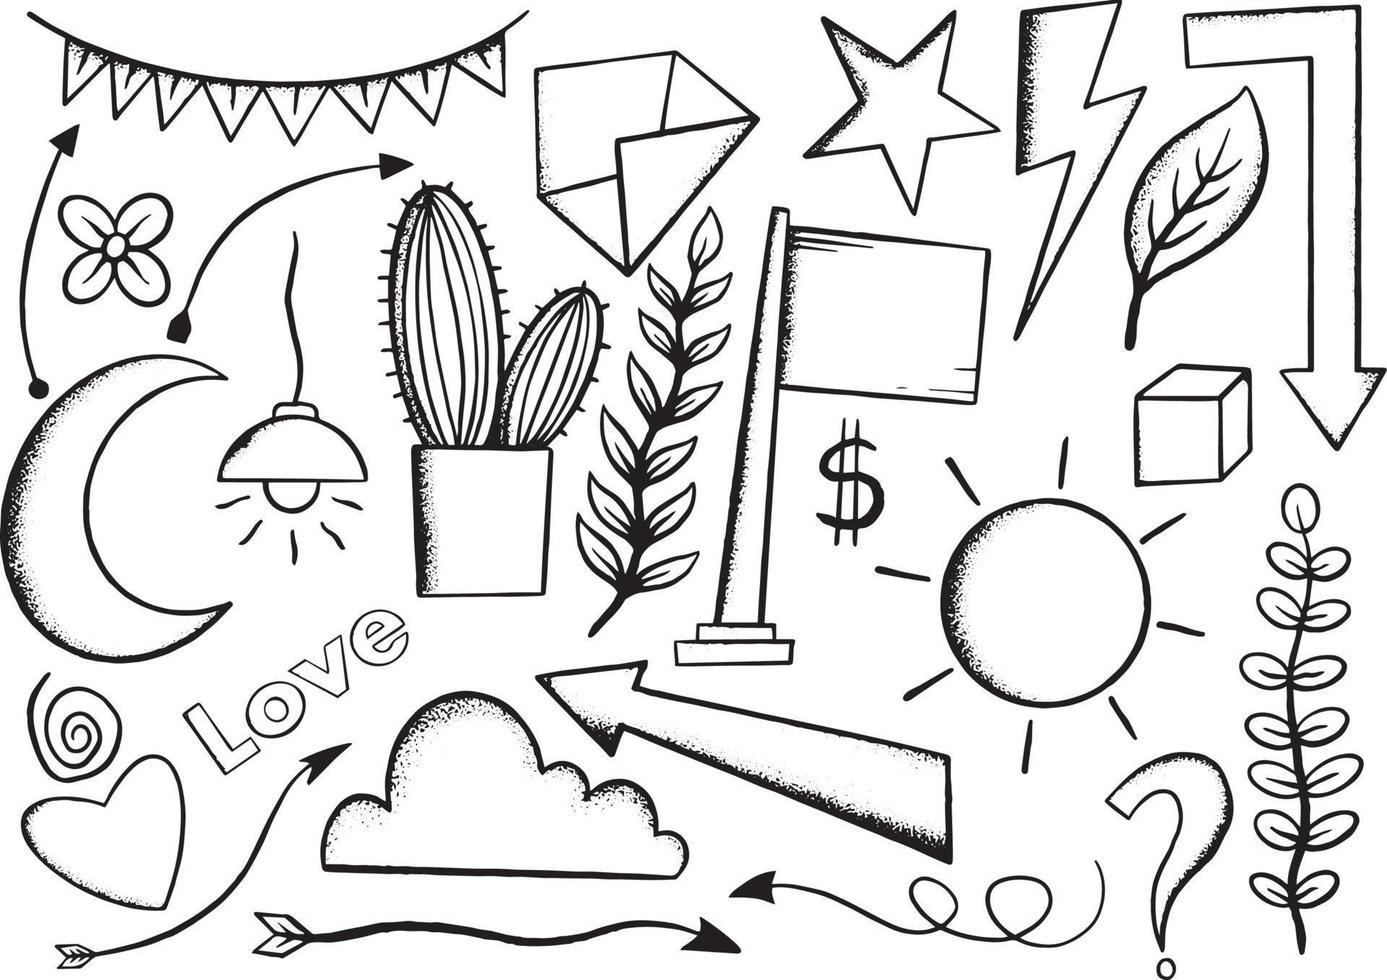 collection hand drawn kids doodle illustration for stickers poster etc vector